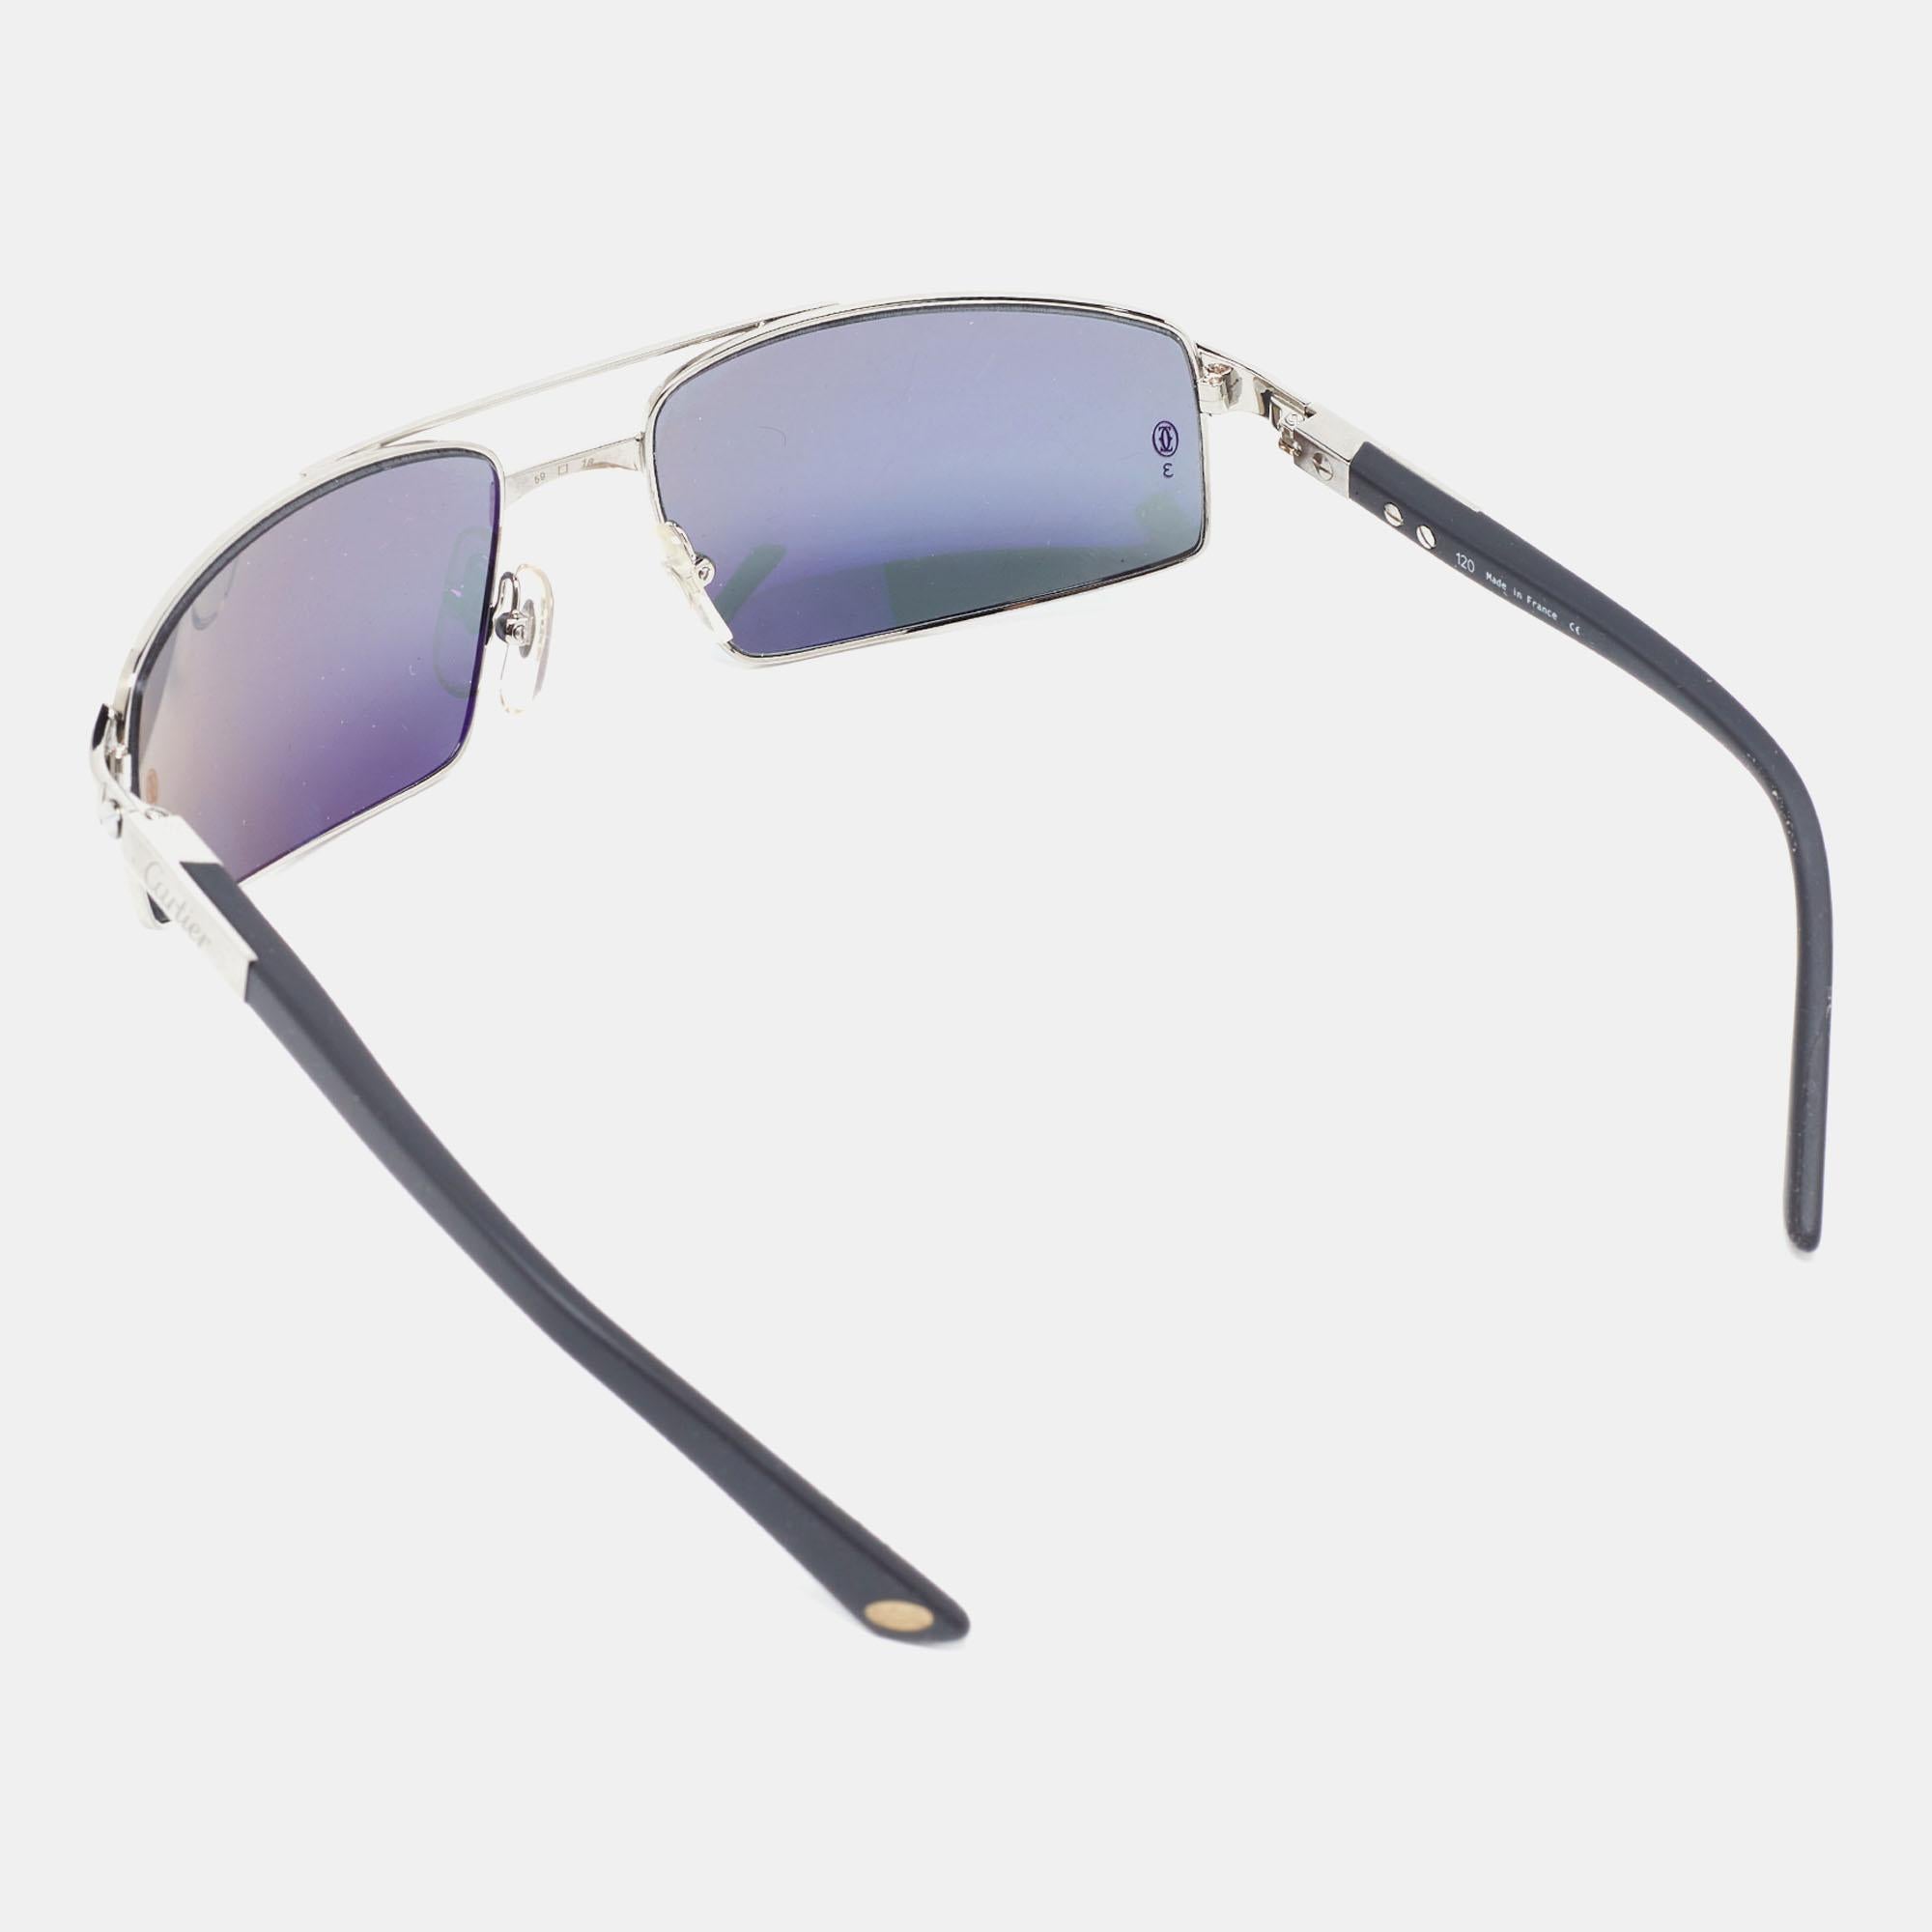 A statement pair of Santos sunglasses from Cartier will surely make a prized buy. Featuring a trendy frame and lenses meant to protect your eyes, the sunglasses are ideal for all-day wear.

Includes: Original Dustbag, Original Case, Original Dust